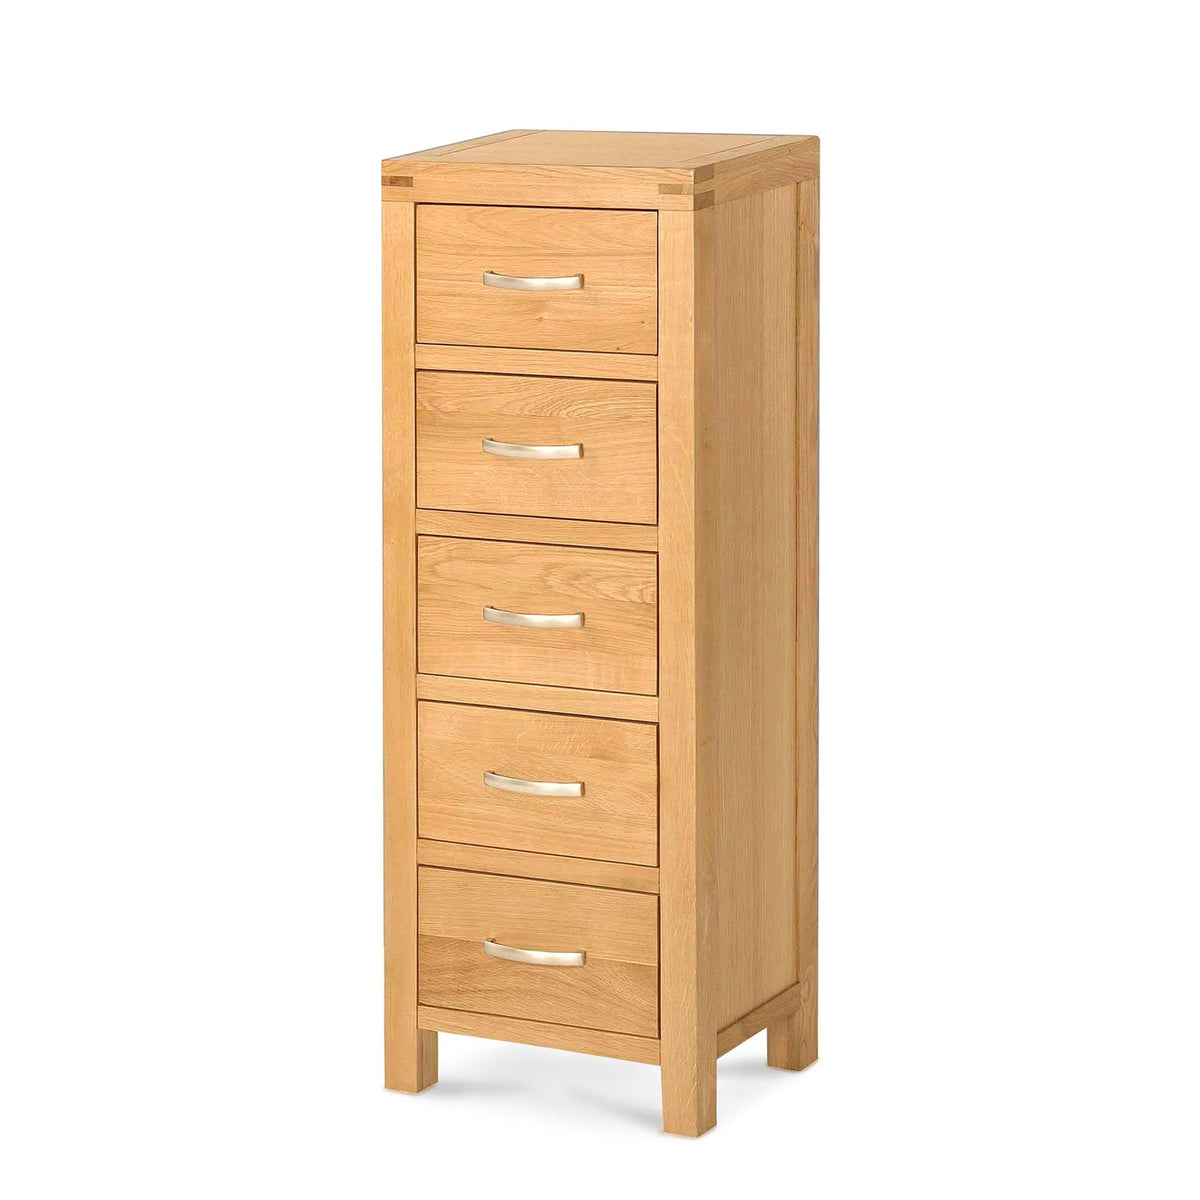 Abbey Light Oak Tallboy Chest of Drawers - Side view